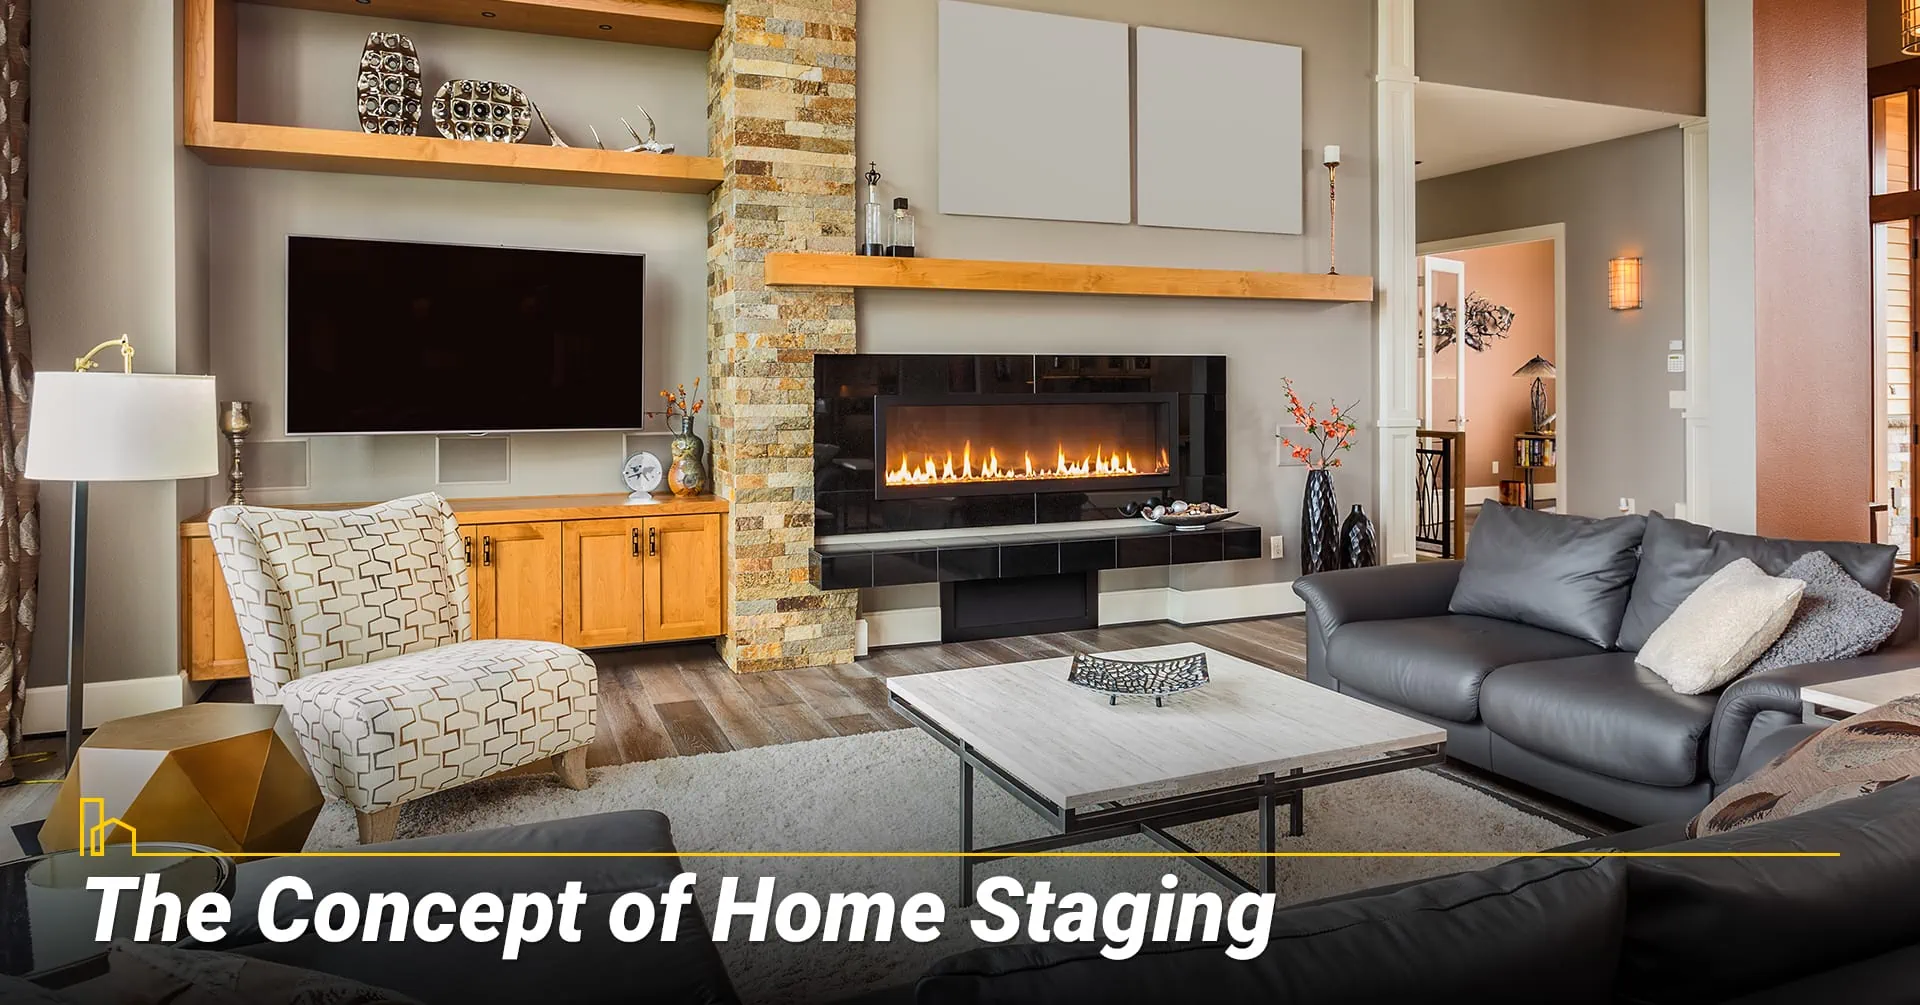 The Concept of Home Staging